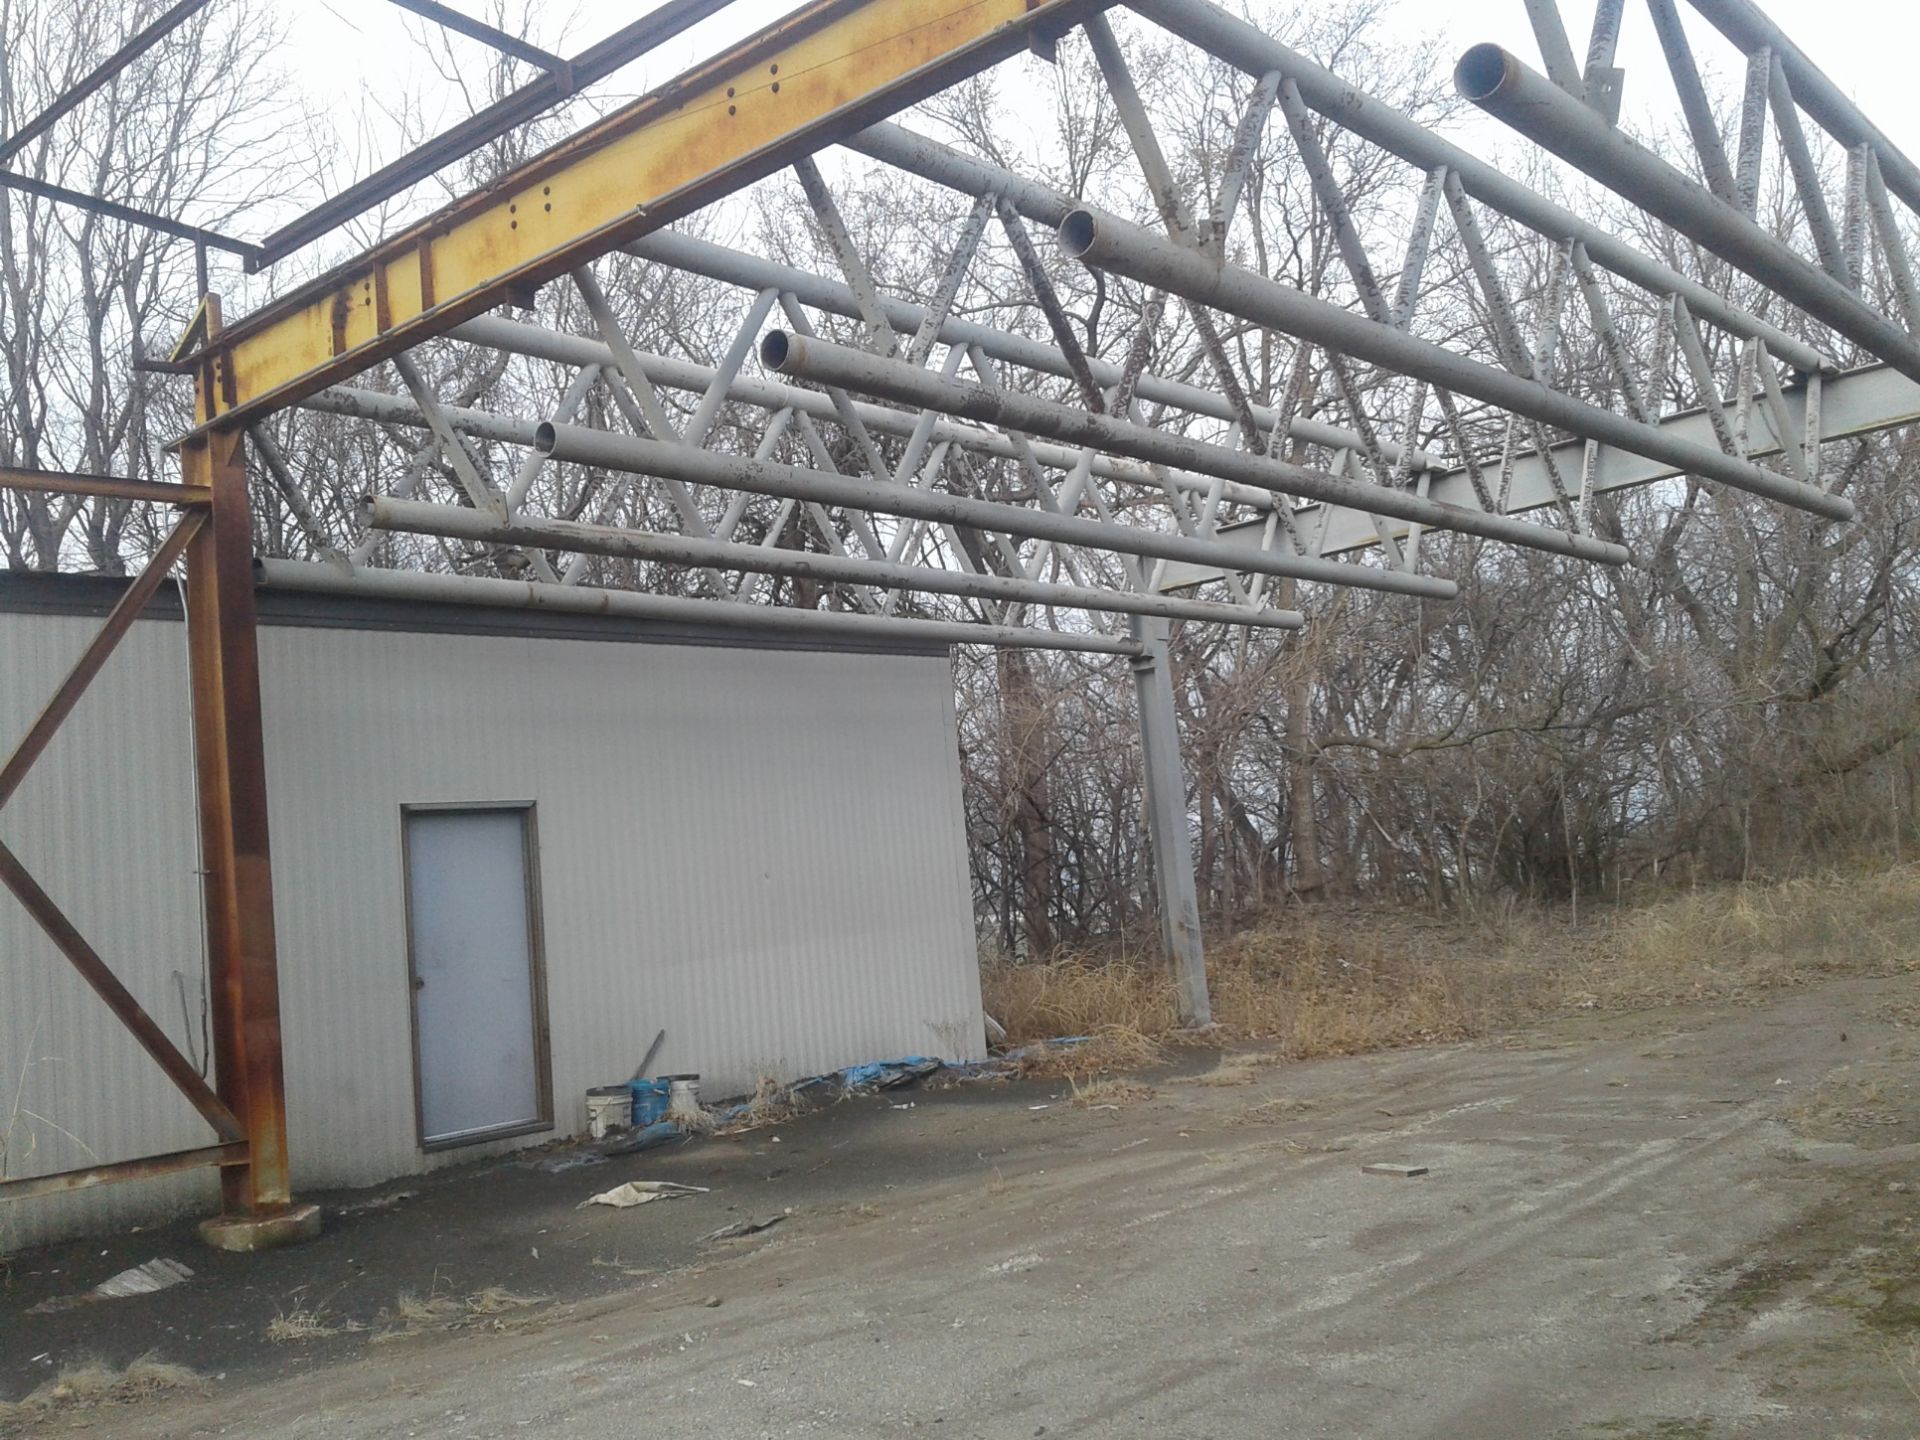 OUTDOOR FREE STANDING CRANE, APPROX 40' X 20', WITH OVERHEAD STEEL TROLLY - Image 6 of 8